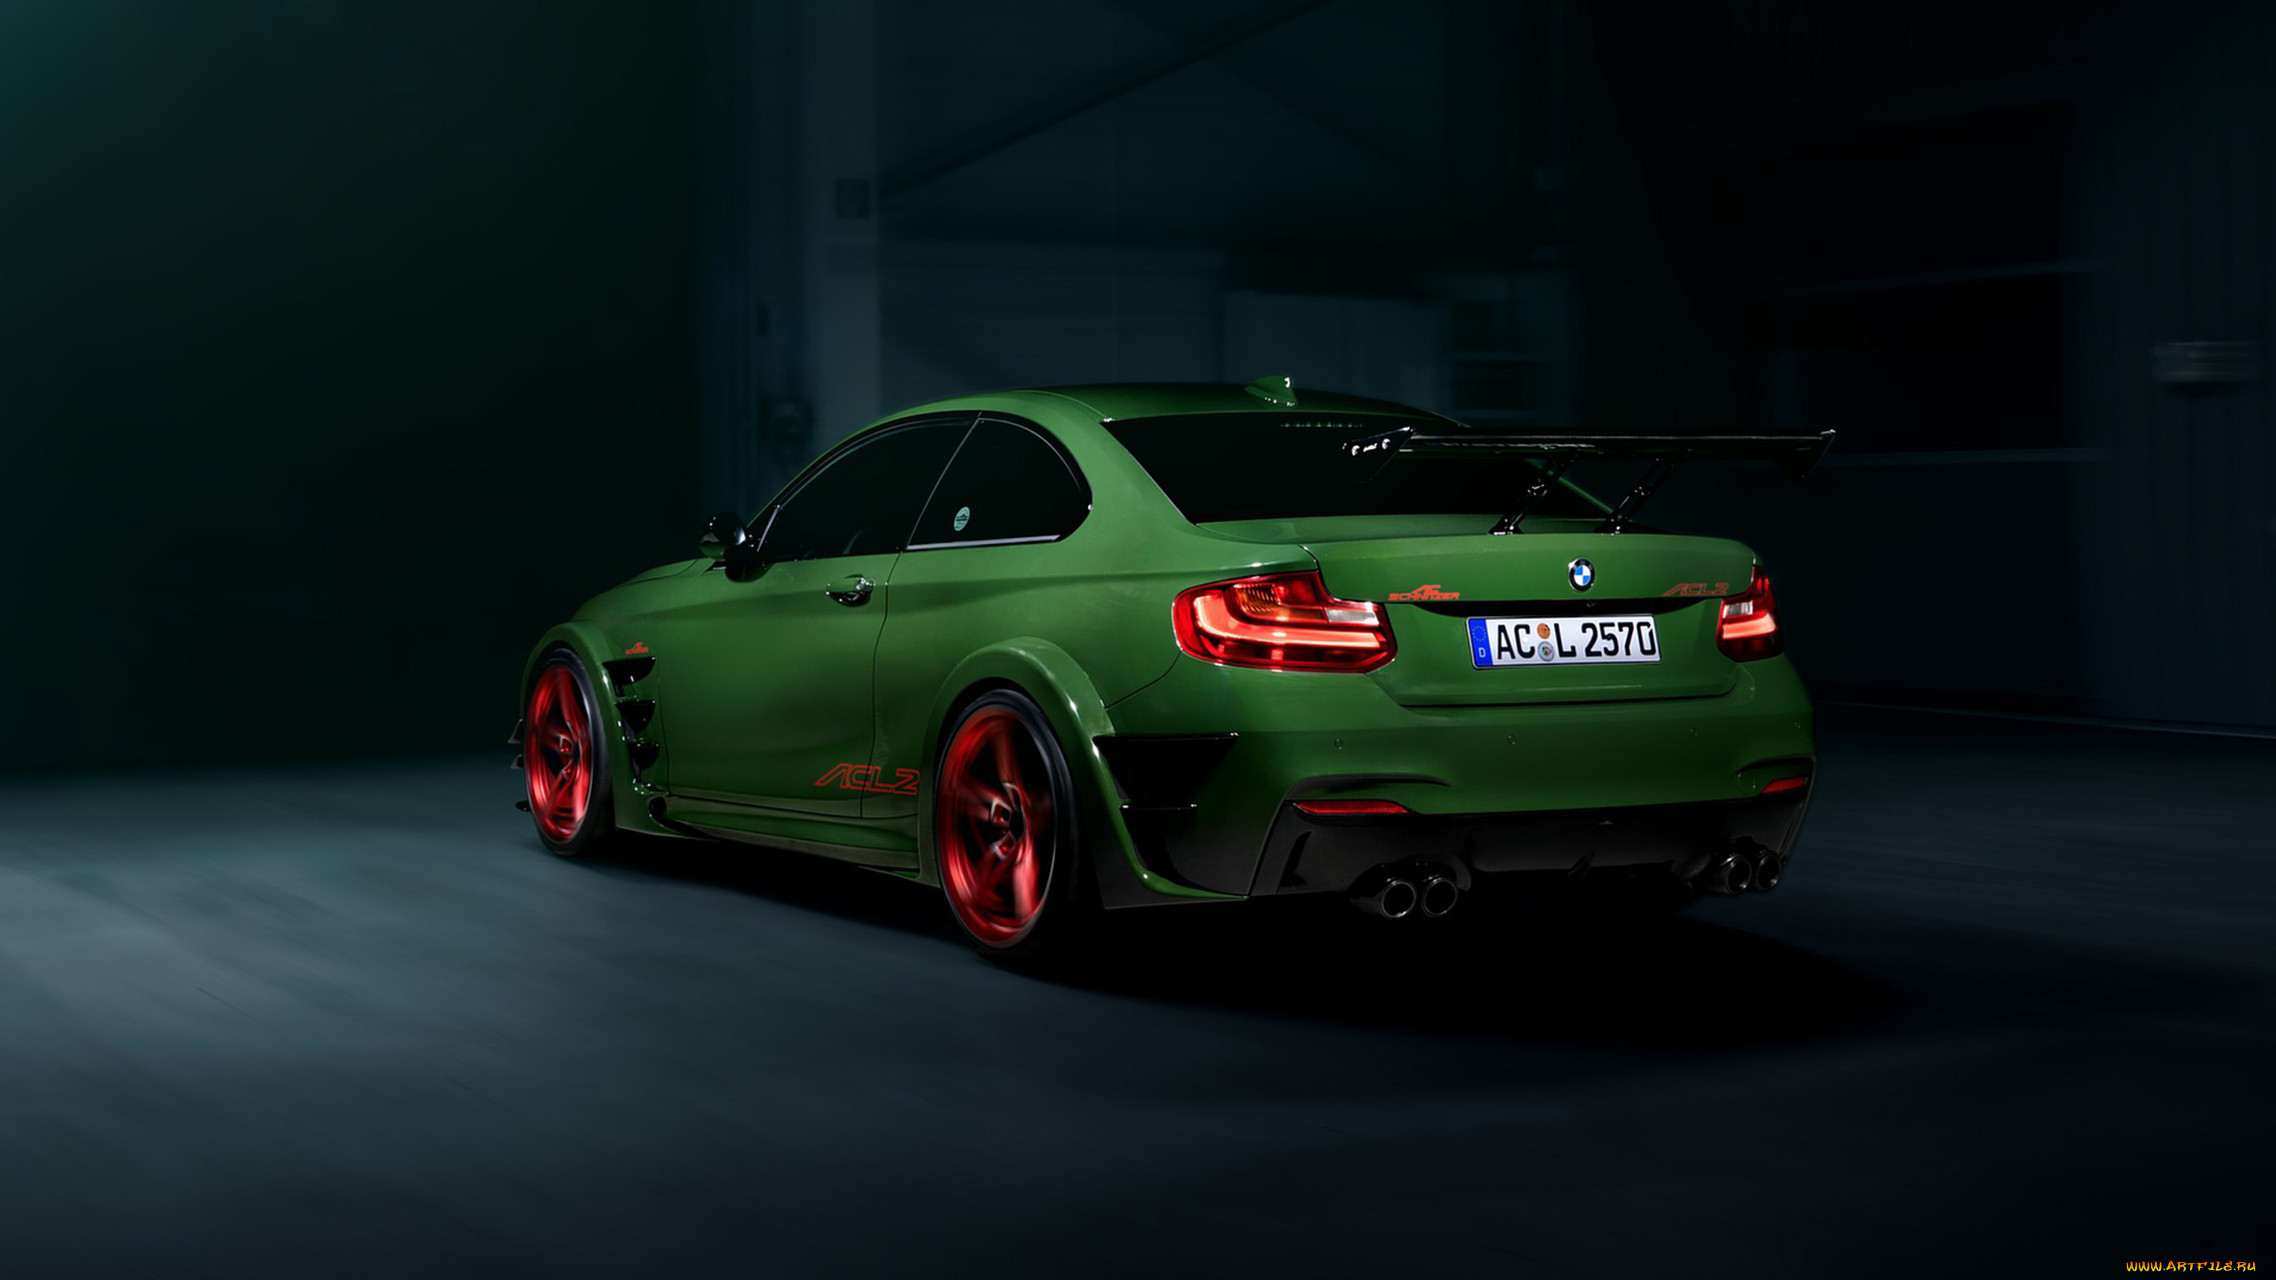 ac schnitzer acl2 concept based on the bmw m-235i coupe 2016, , bmw, ac, schnitzer, based, concept, acl2, 2016, coupe, m-235i